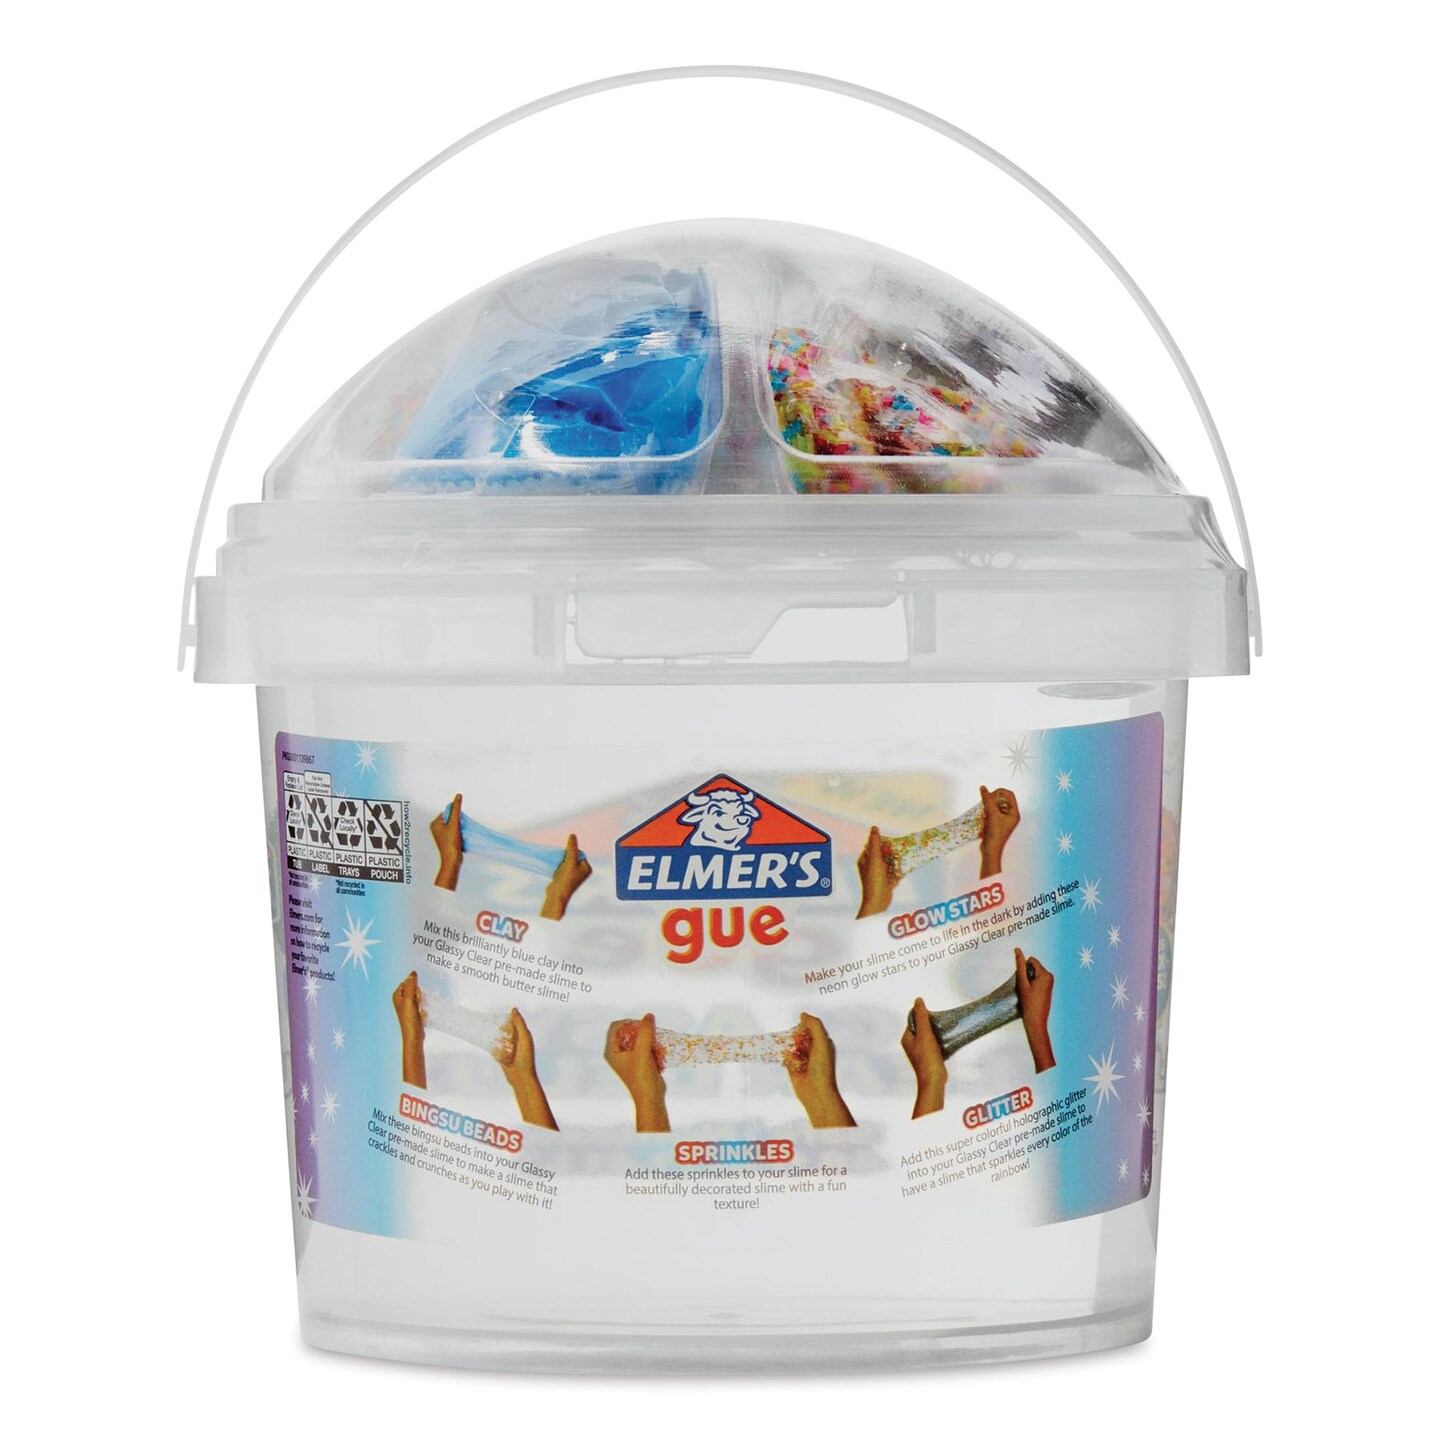 Elmer&#x2019;s Gue Premade Slime - Glassy Clear Deluxe Bucket with Mix-Ins, 3 lb